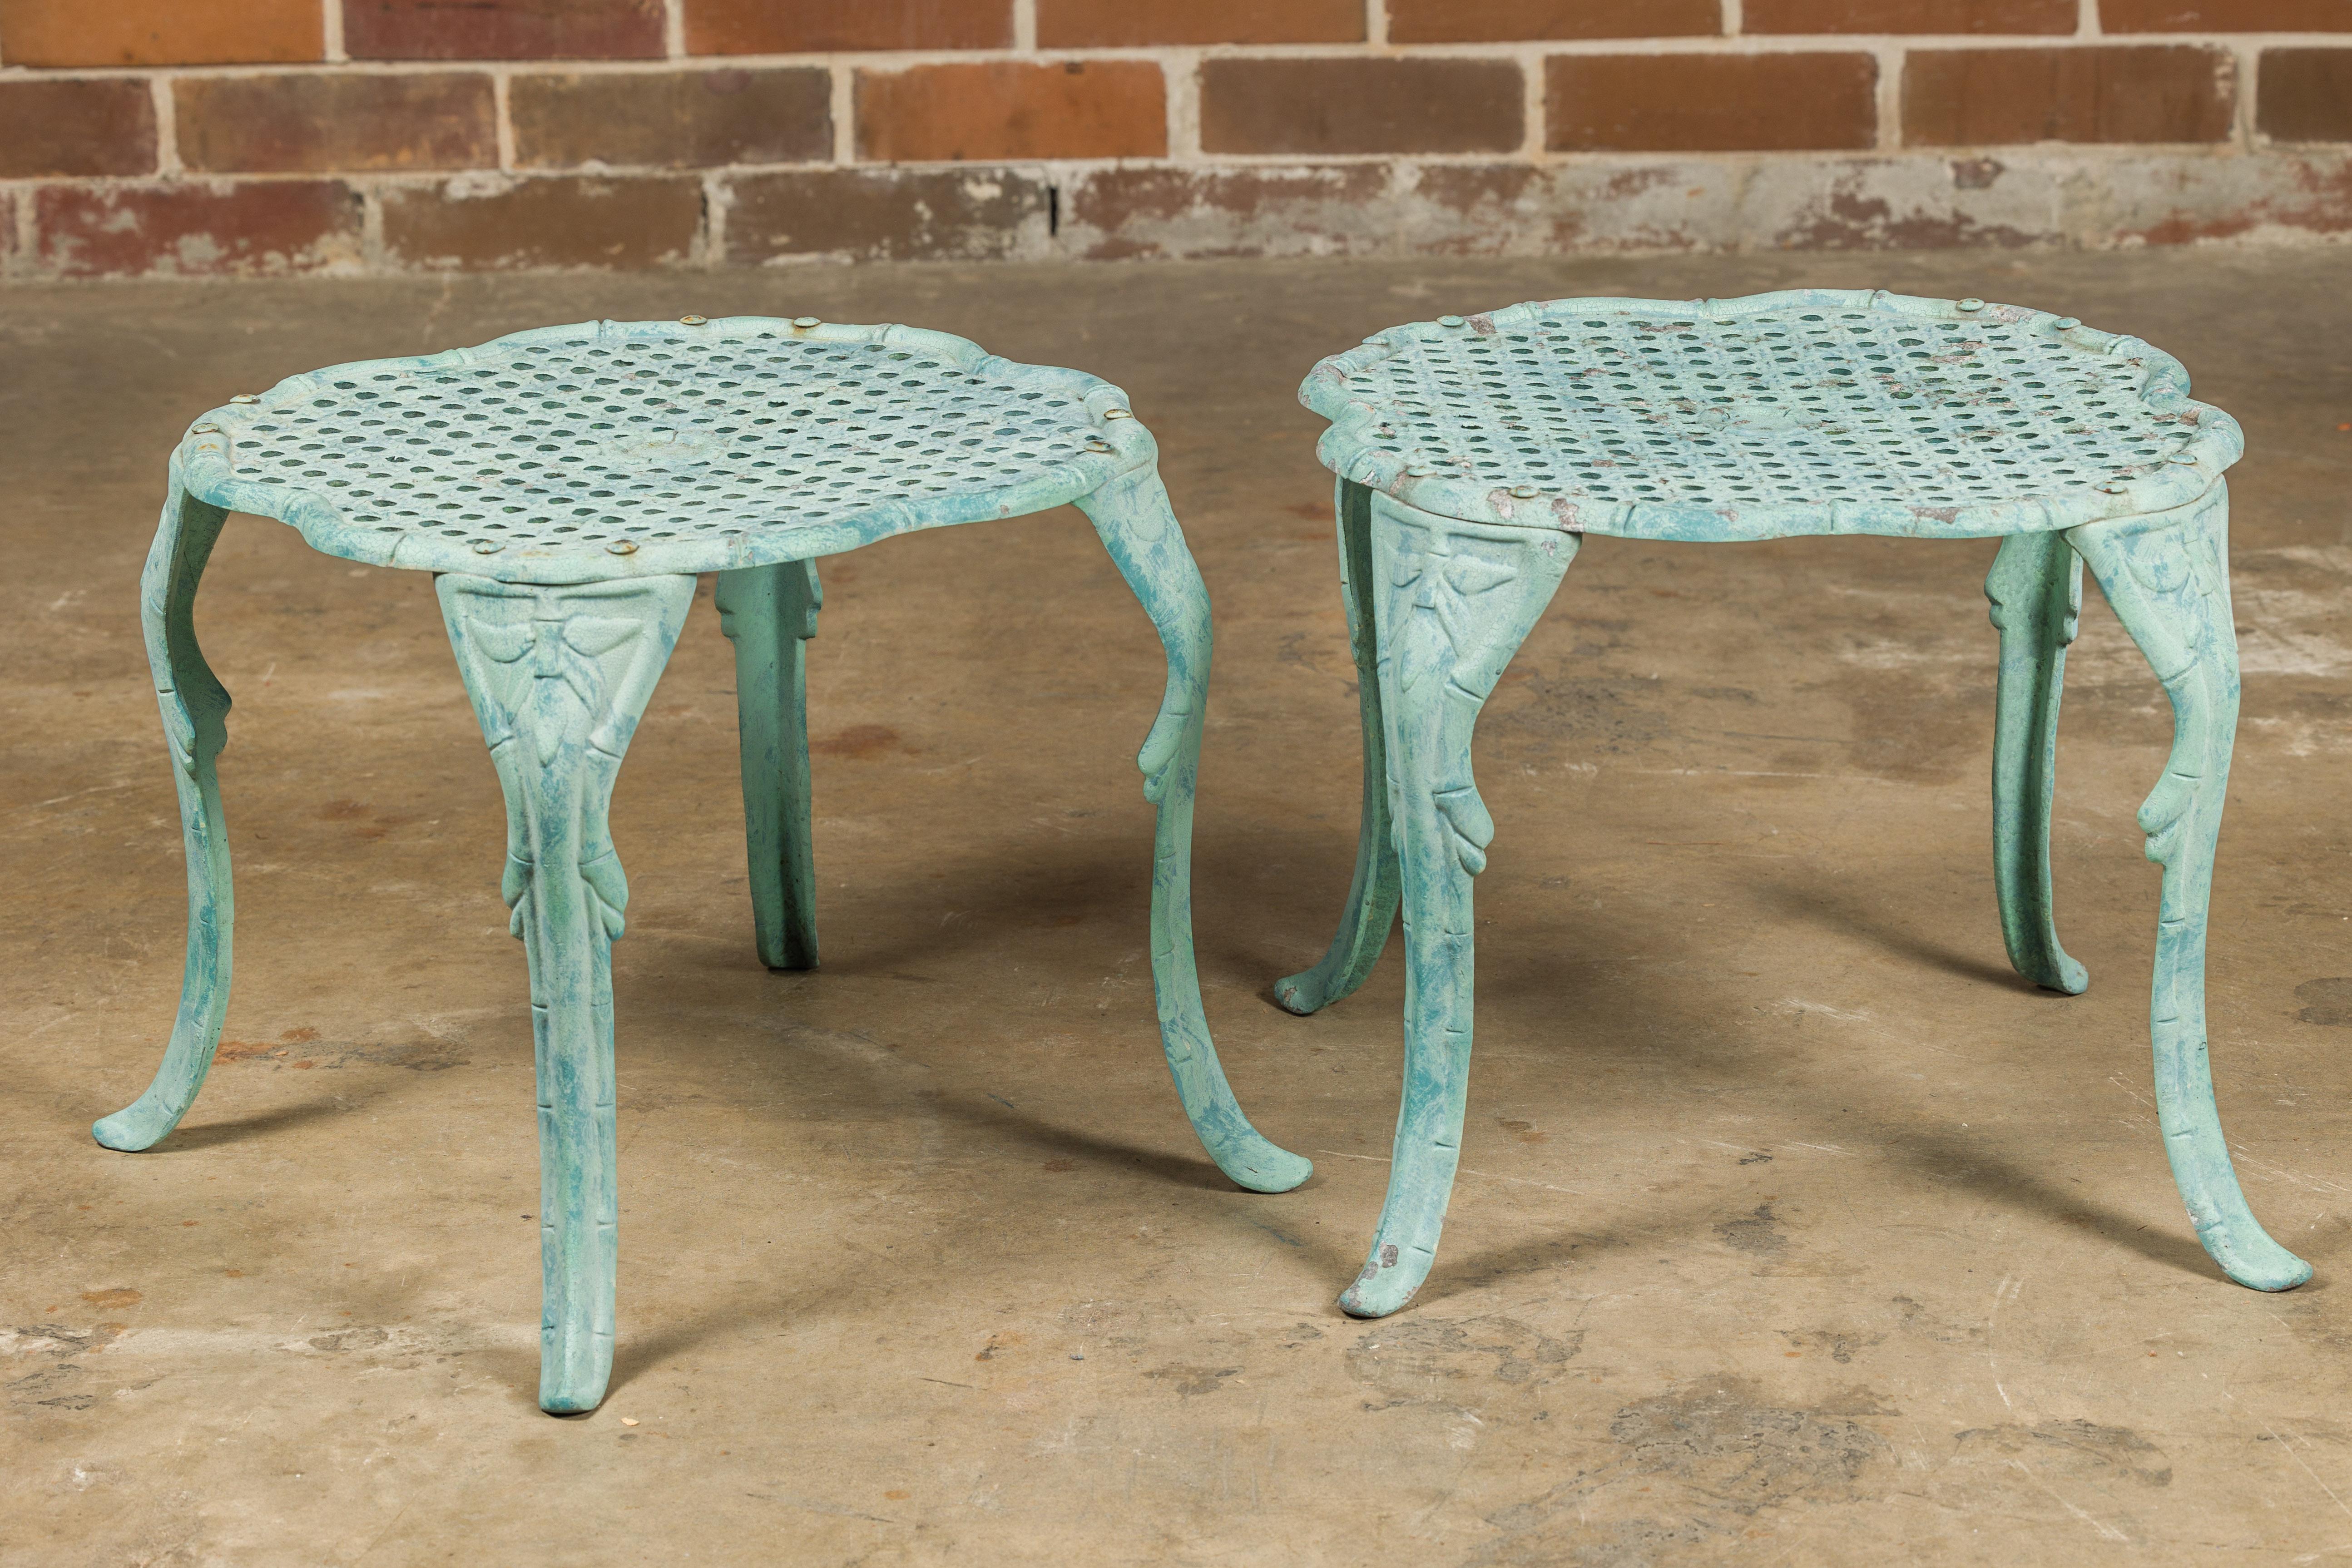 A pair of French painted cast iron low side tables from the Midcentury period, with blue green finish, wicker inspired top and cabriole legs. Discover the elegance and charm of these Midcentury French cast iron side tables, a delightful pair that